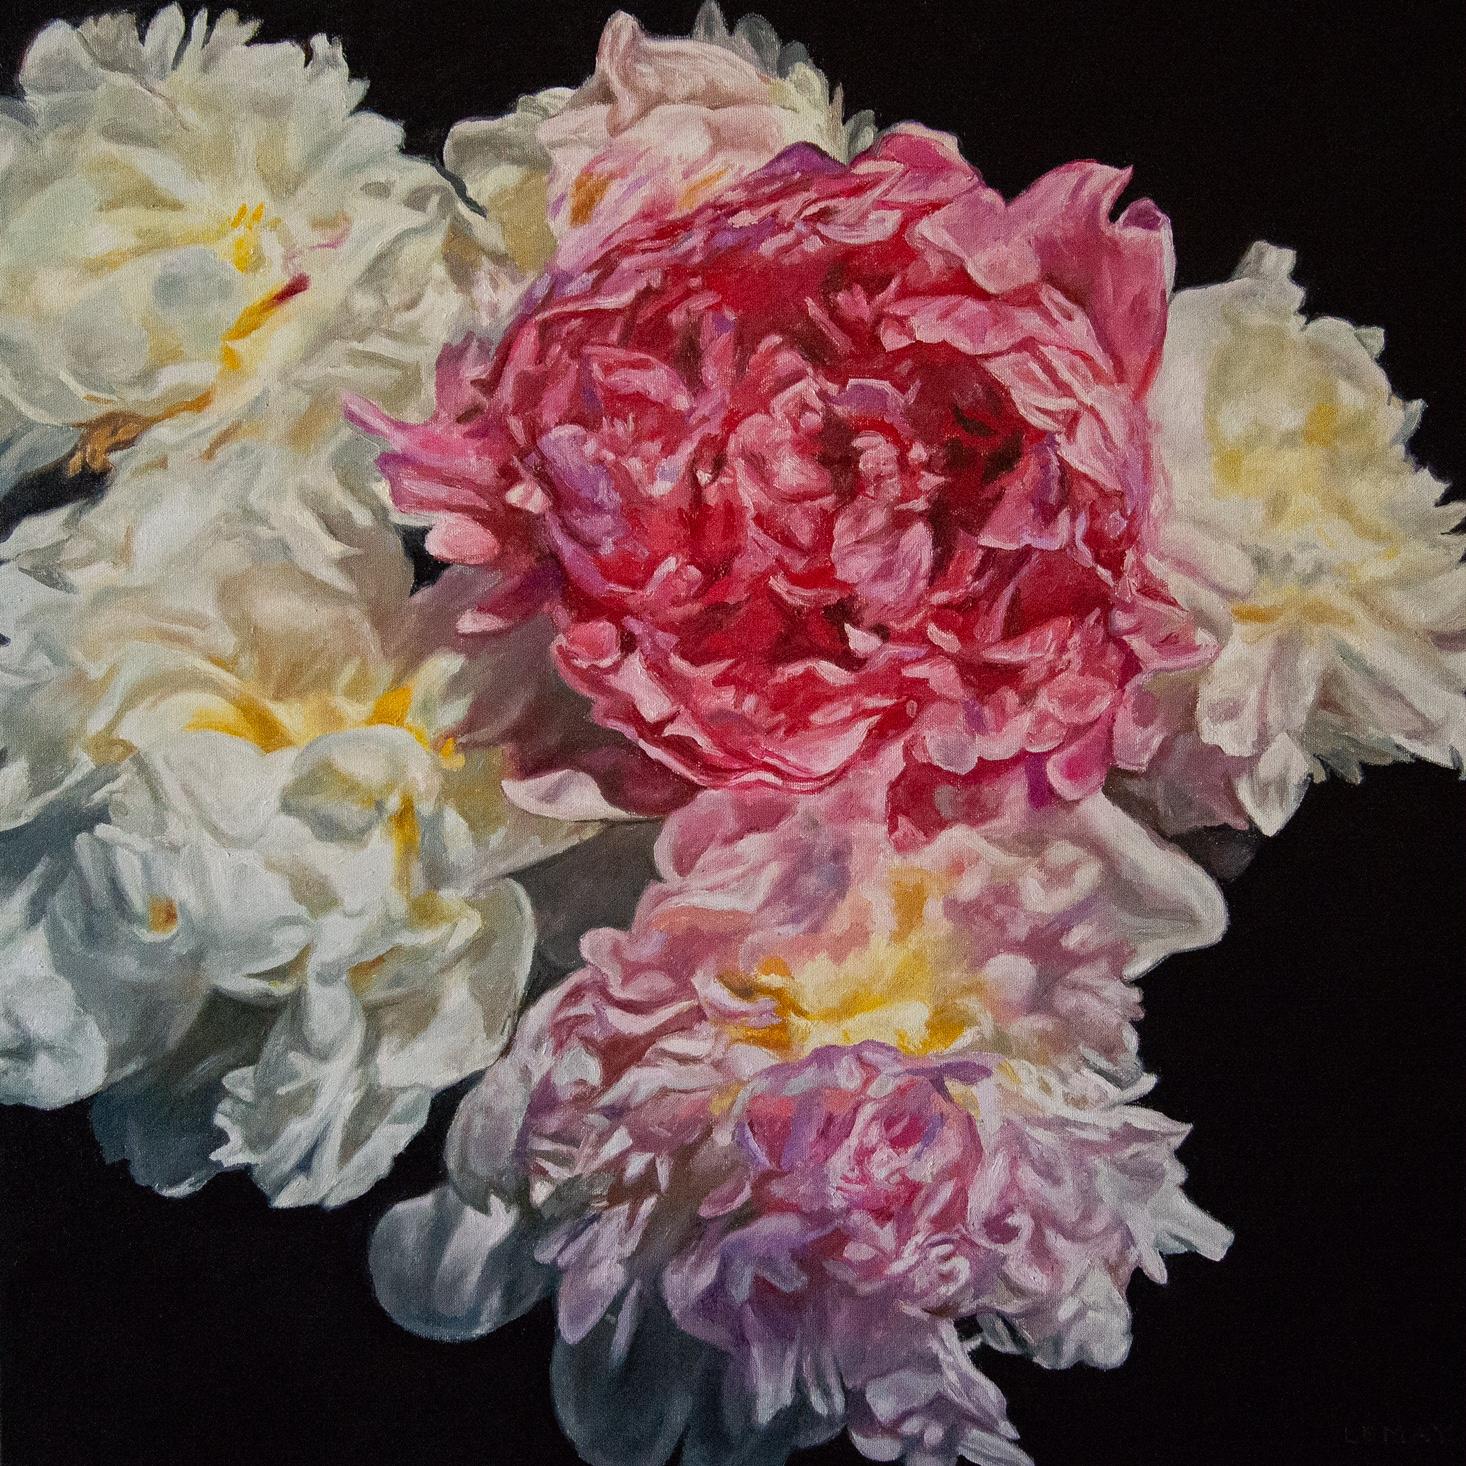 Robert Lemay Still-Life Painting - Pink and White Peonies-original modern realism floral painting-contemporary Art